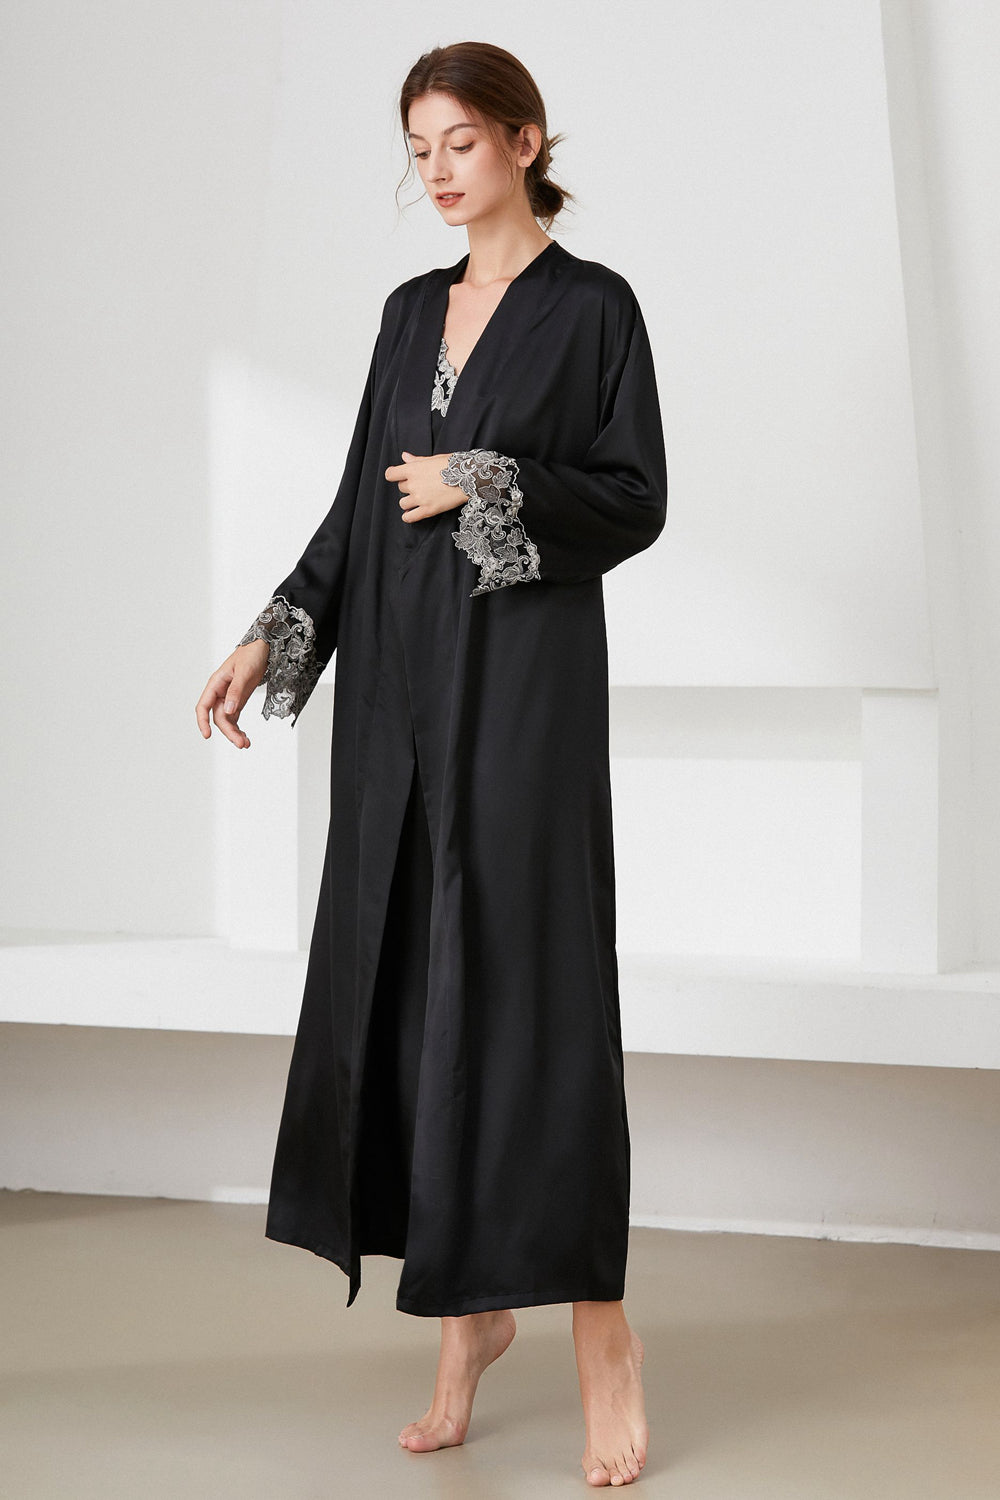 Angle view of woman standing wearing black nightdress and matching robe, with lace trim